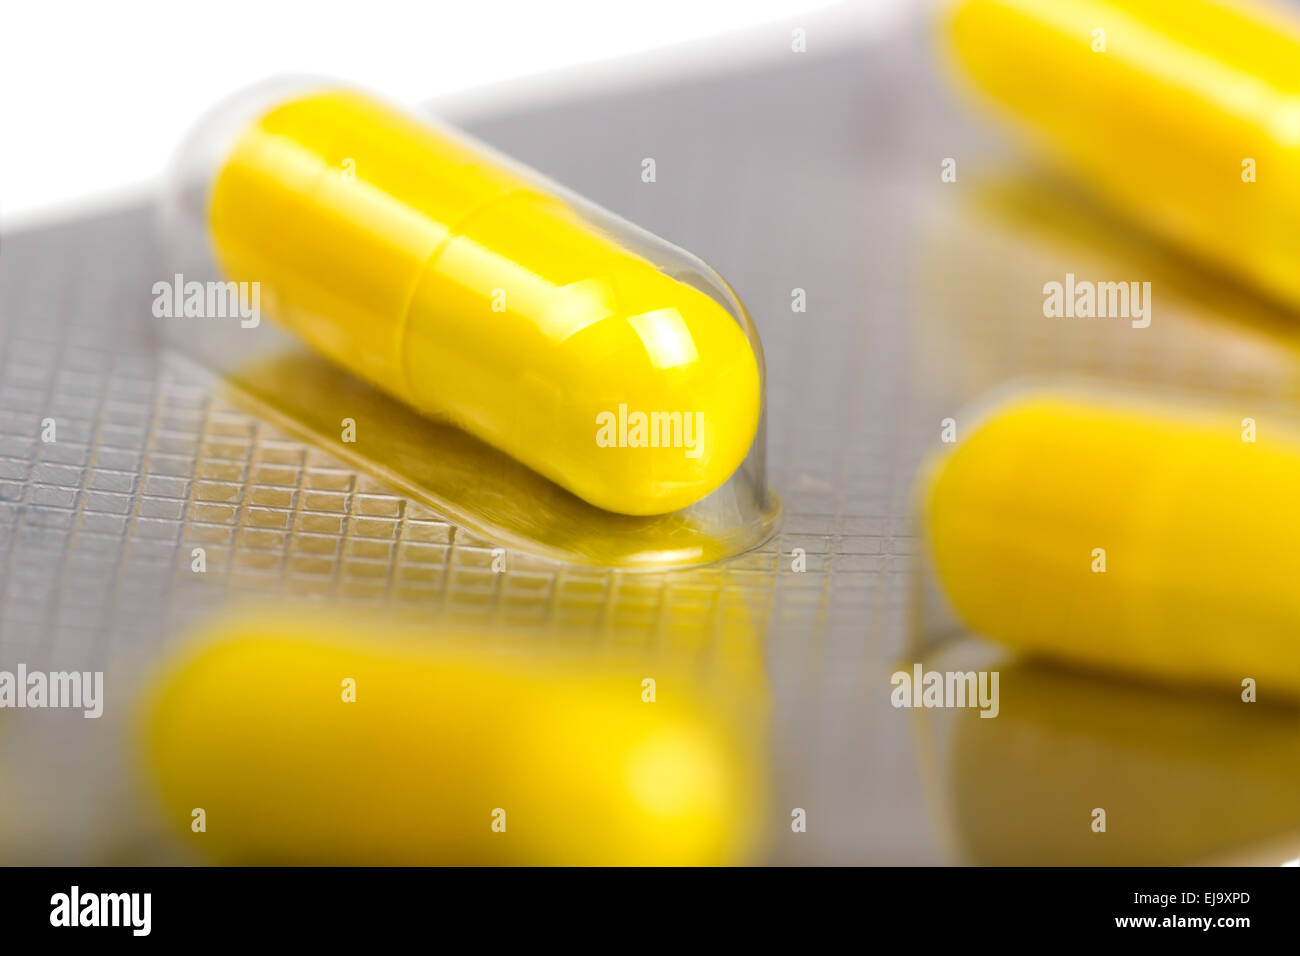 Capsules packed in blisters, isolated on white Stock Photo - Alamy